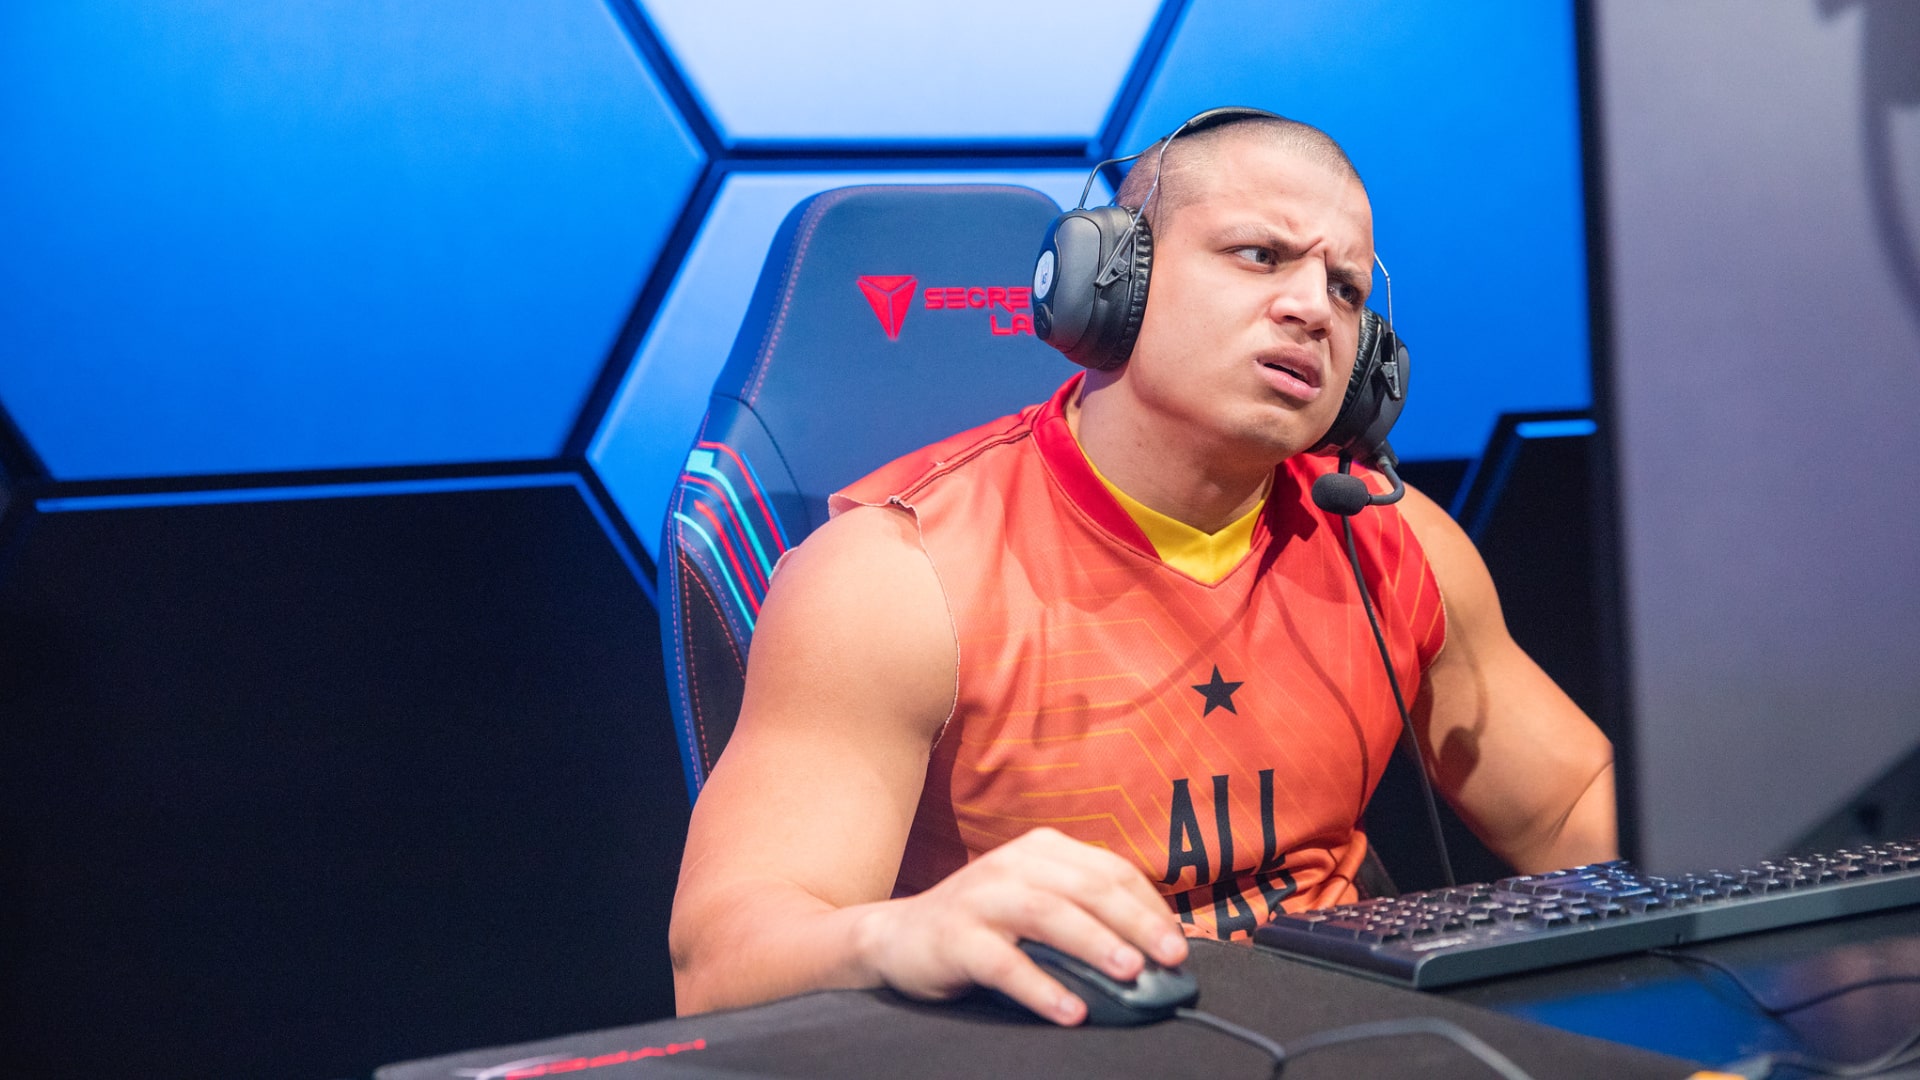 How tall is tyler1